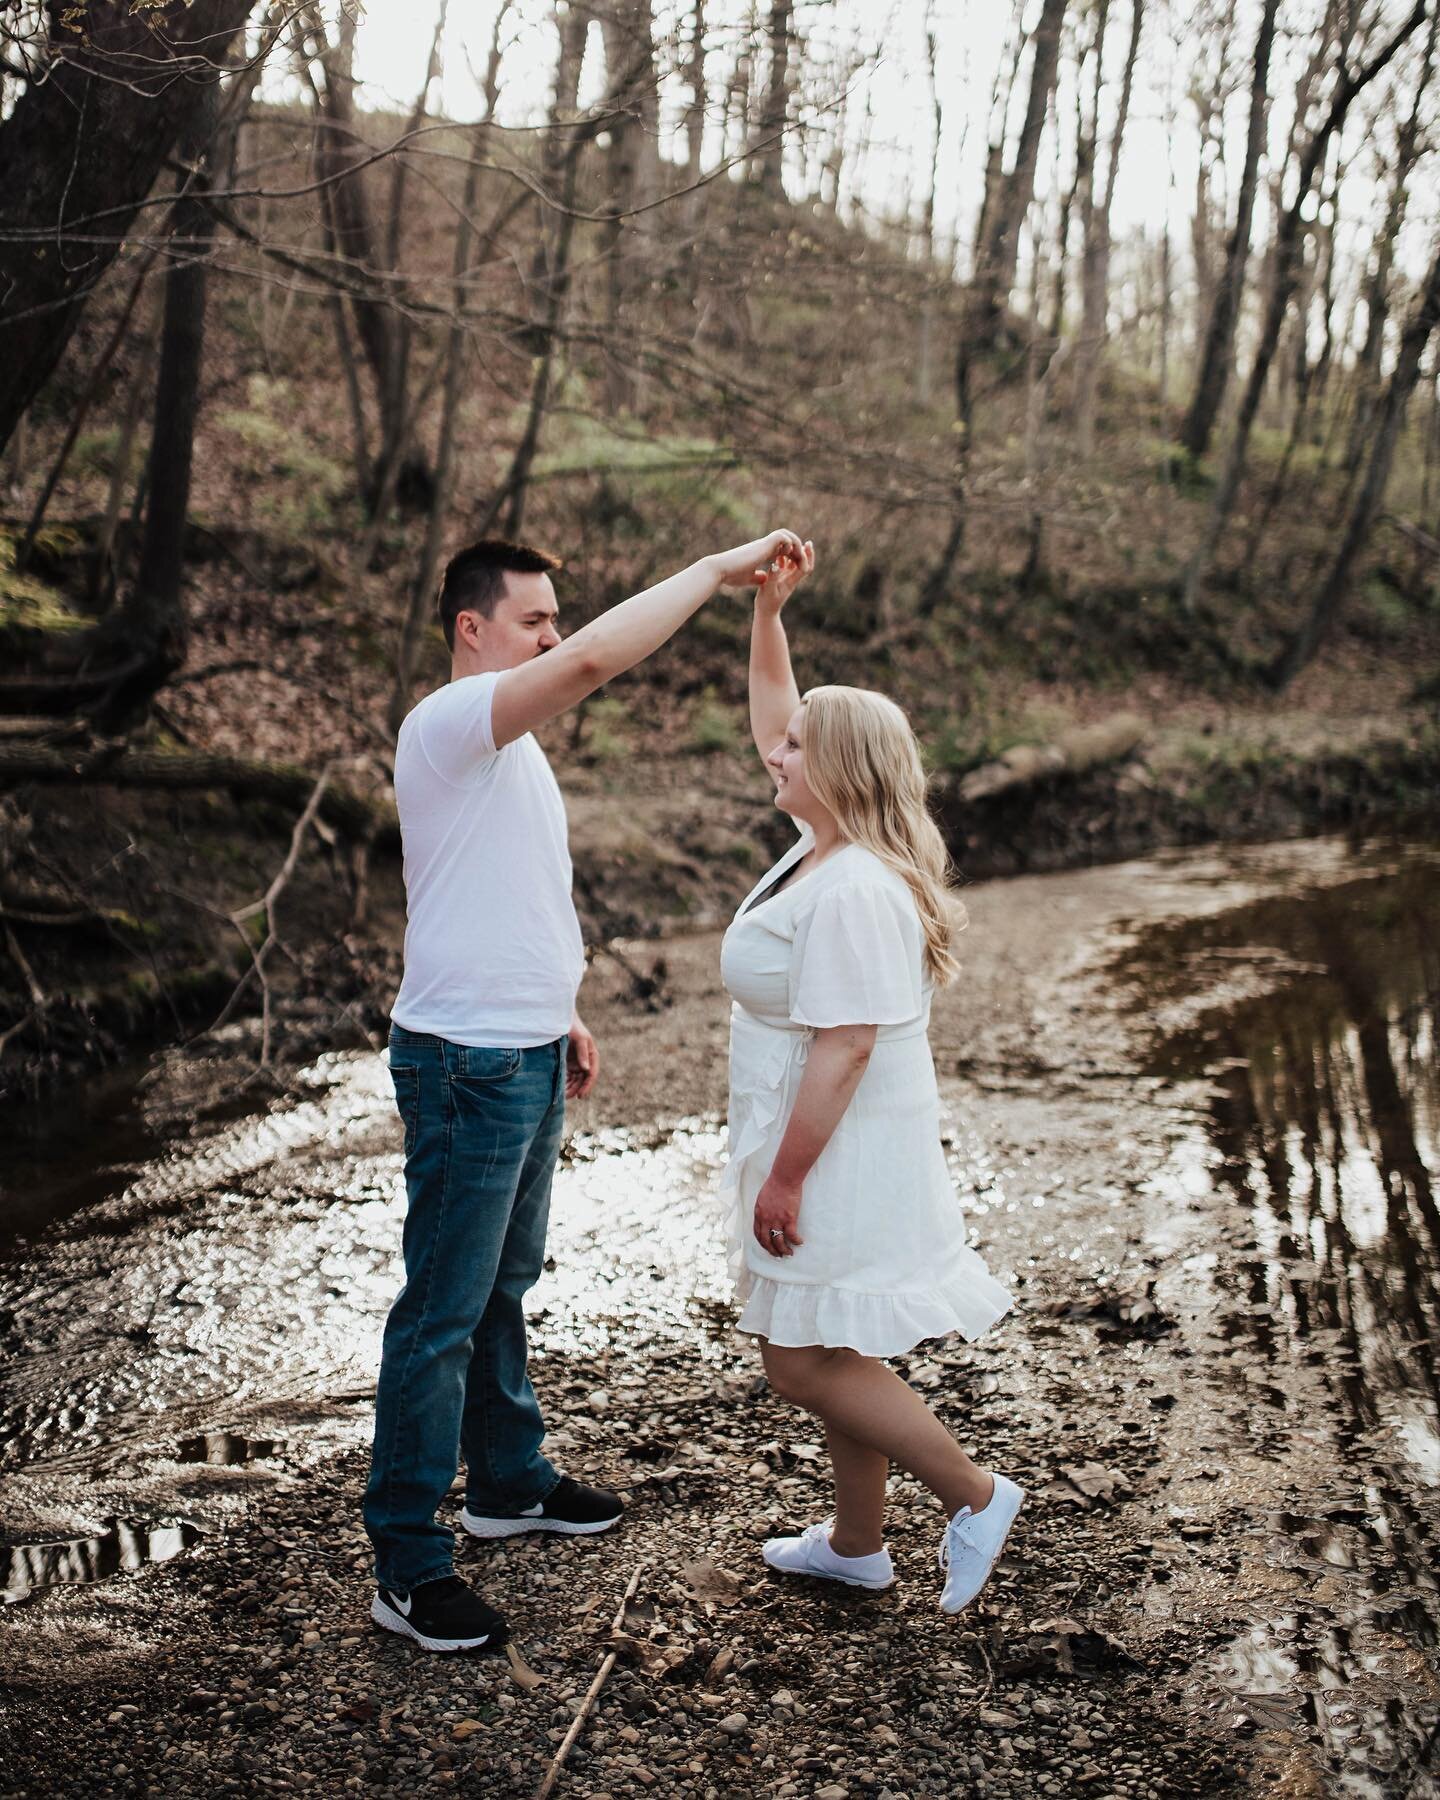 Our most recent engagement session 🍃

I definitely had my work cut out for me with finding a location that wasn&rsquo;t completely full of bare trees. Living in the Midwest during spring, you know what I&rsquo;m talking about. 

Love all the neutral